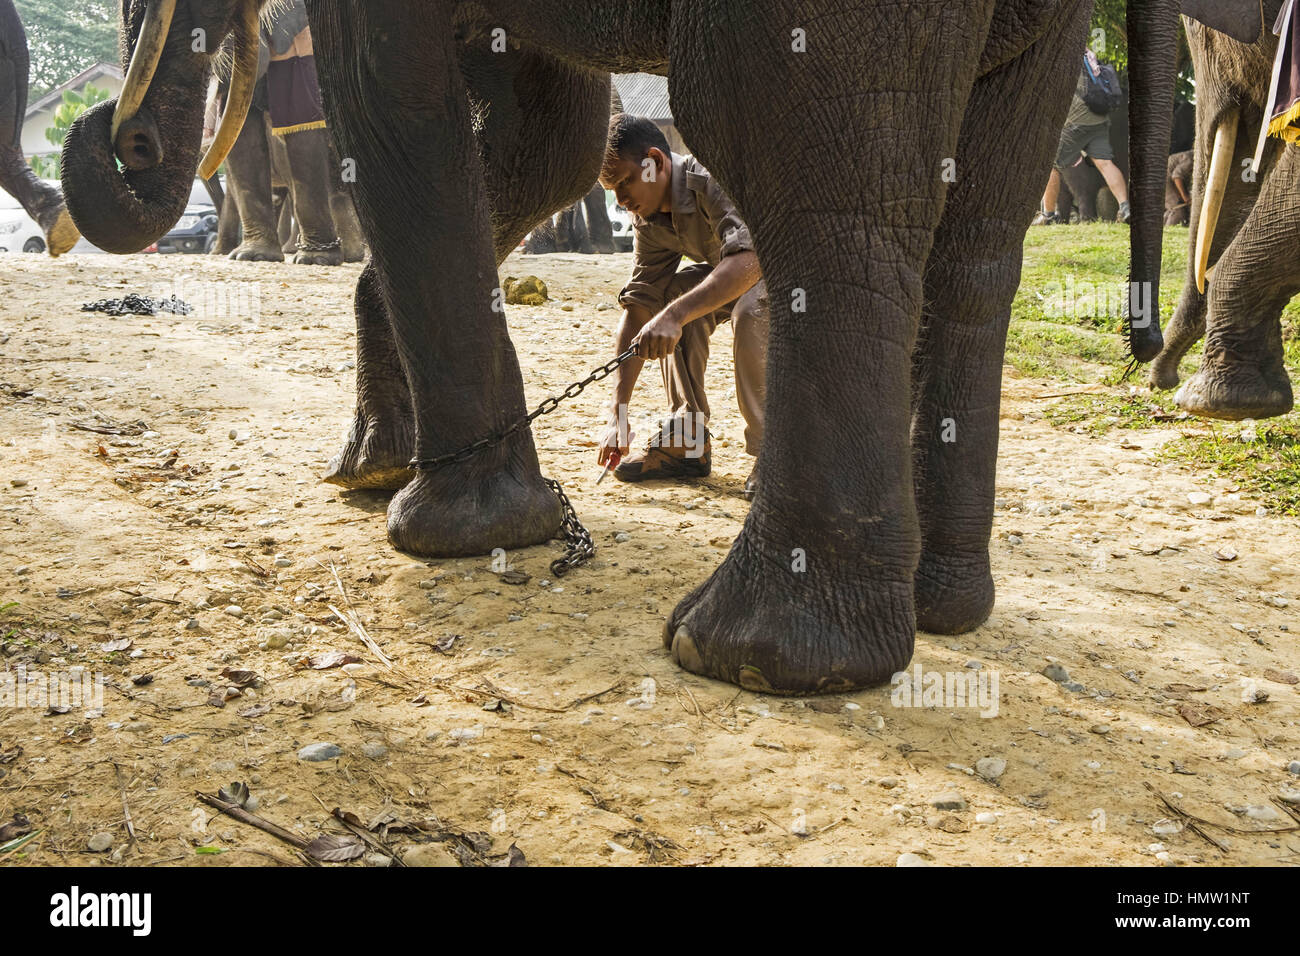 Minas, Riau, Indonesia. 5th Feb, 2017. Sumatran elephants being trained at Minas Elephant Training Centre in Riau Province, Indonesia. Illegal loggers who are destroying the habitat of Sumatran elephants. Sumatran elephants are becoming increasingly endangered due to the destruction of their habitat by logging, palm oil and rubber industries. Credit: Dedy Sutisna/ZUMA Wire/Alamy Live News Stock Photo